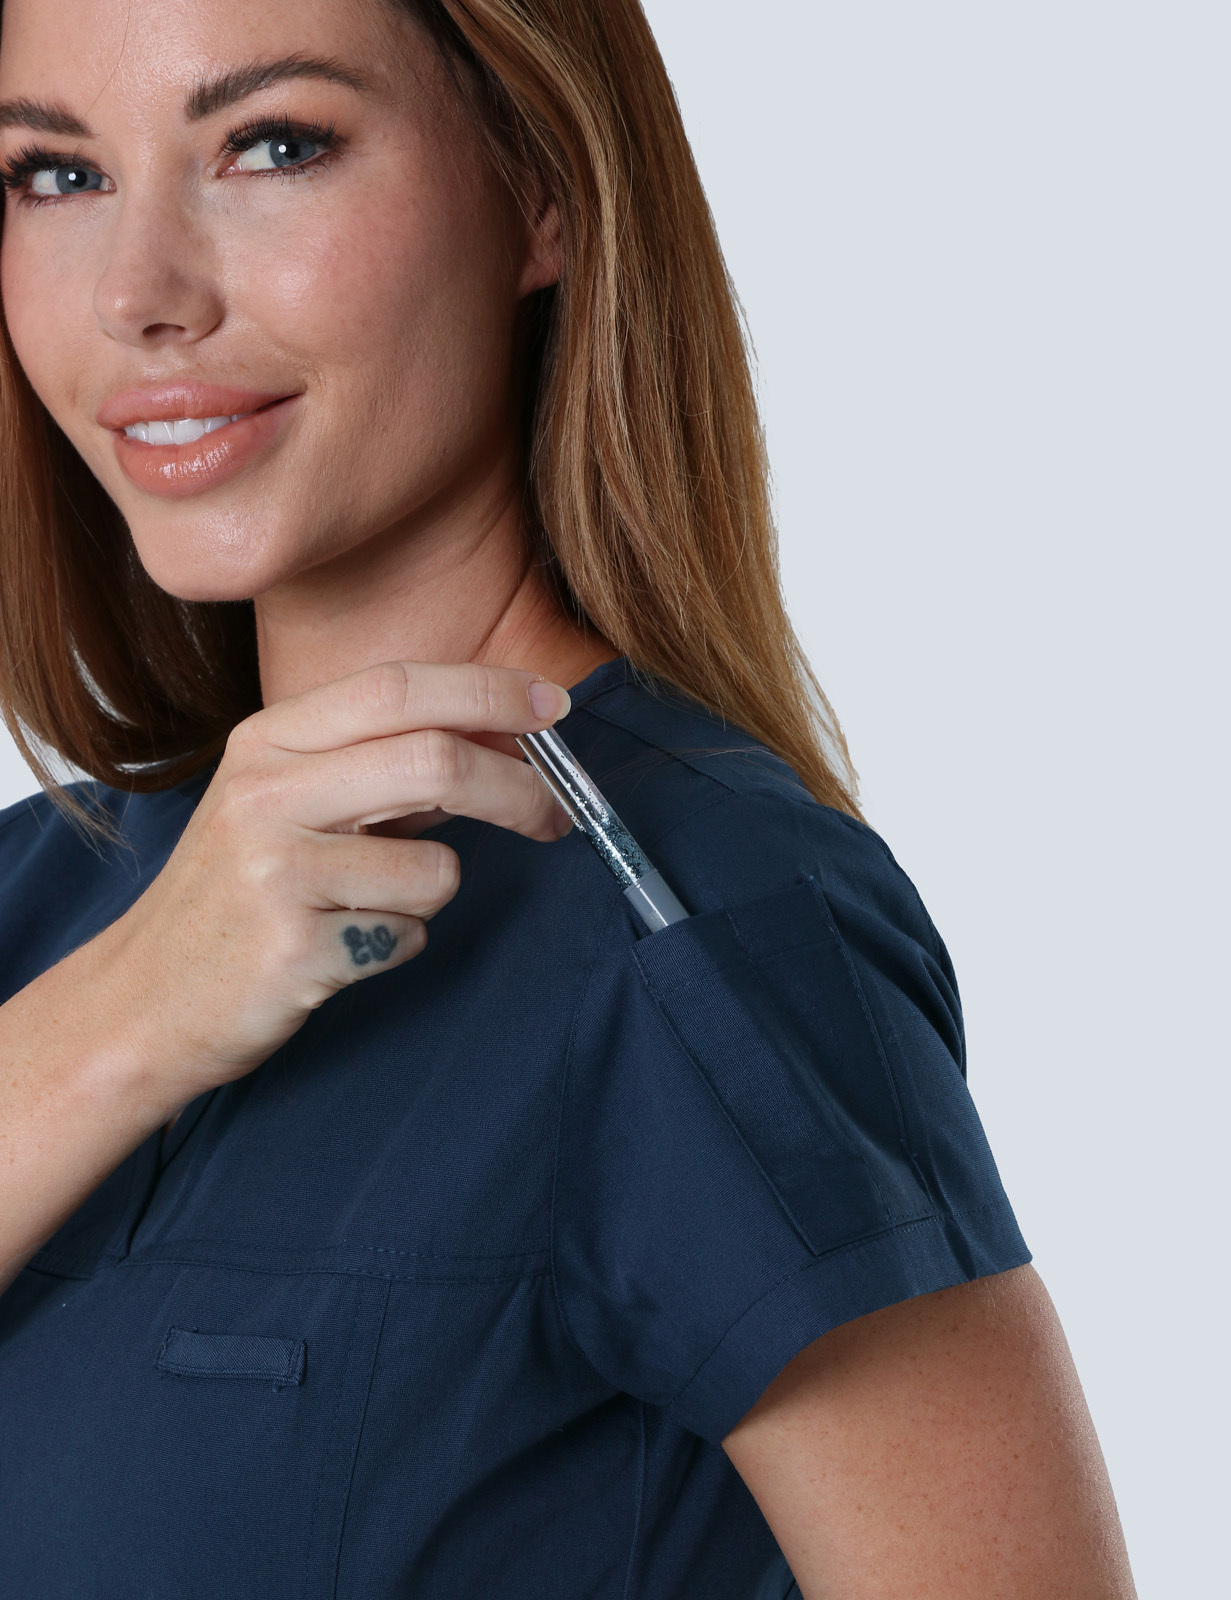 Frankston - AAAU Nurse (Women's Fit Solid Scrub Top and Cargo Pants in Navy incl Logos)